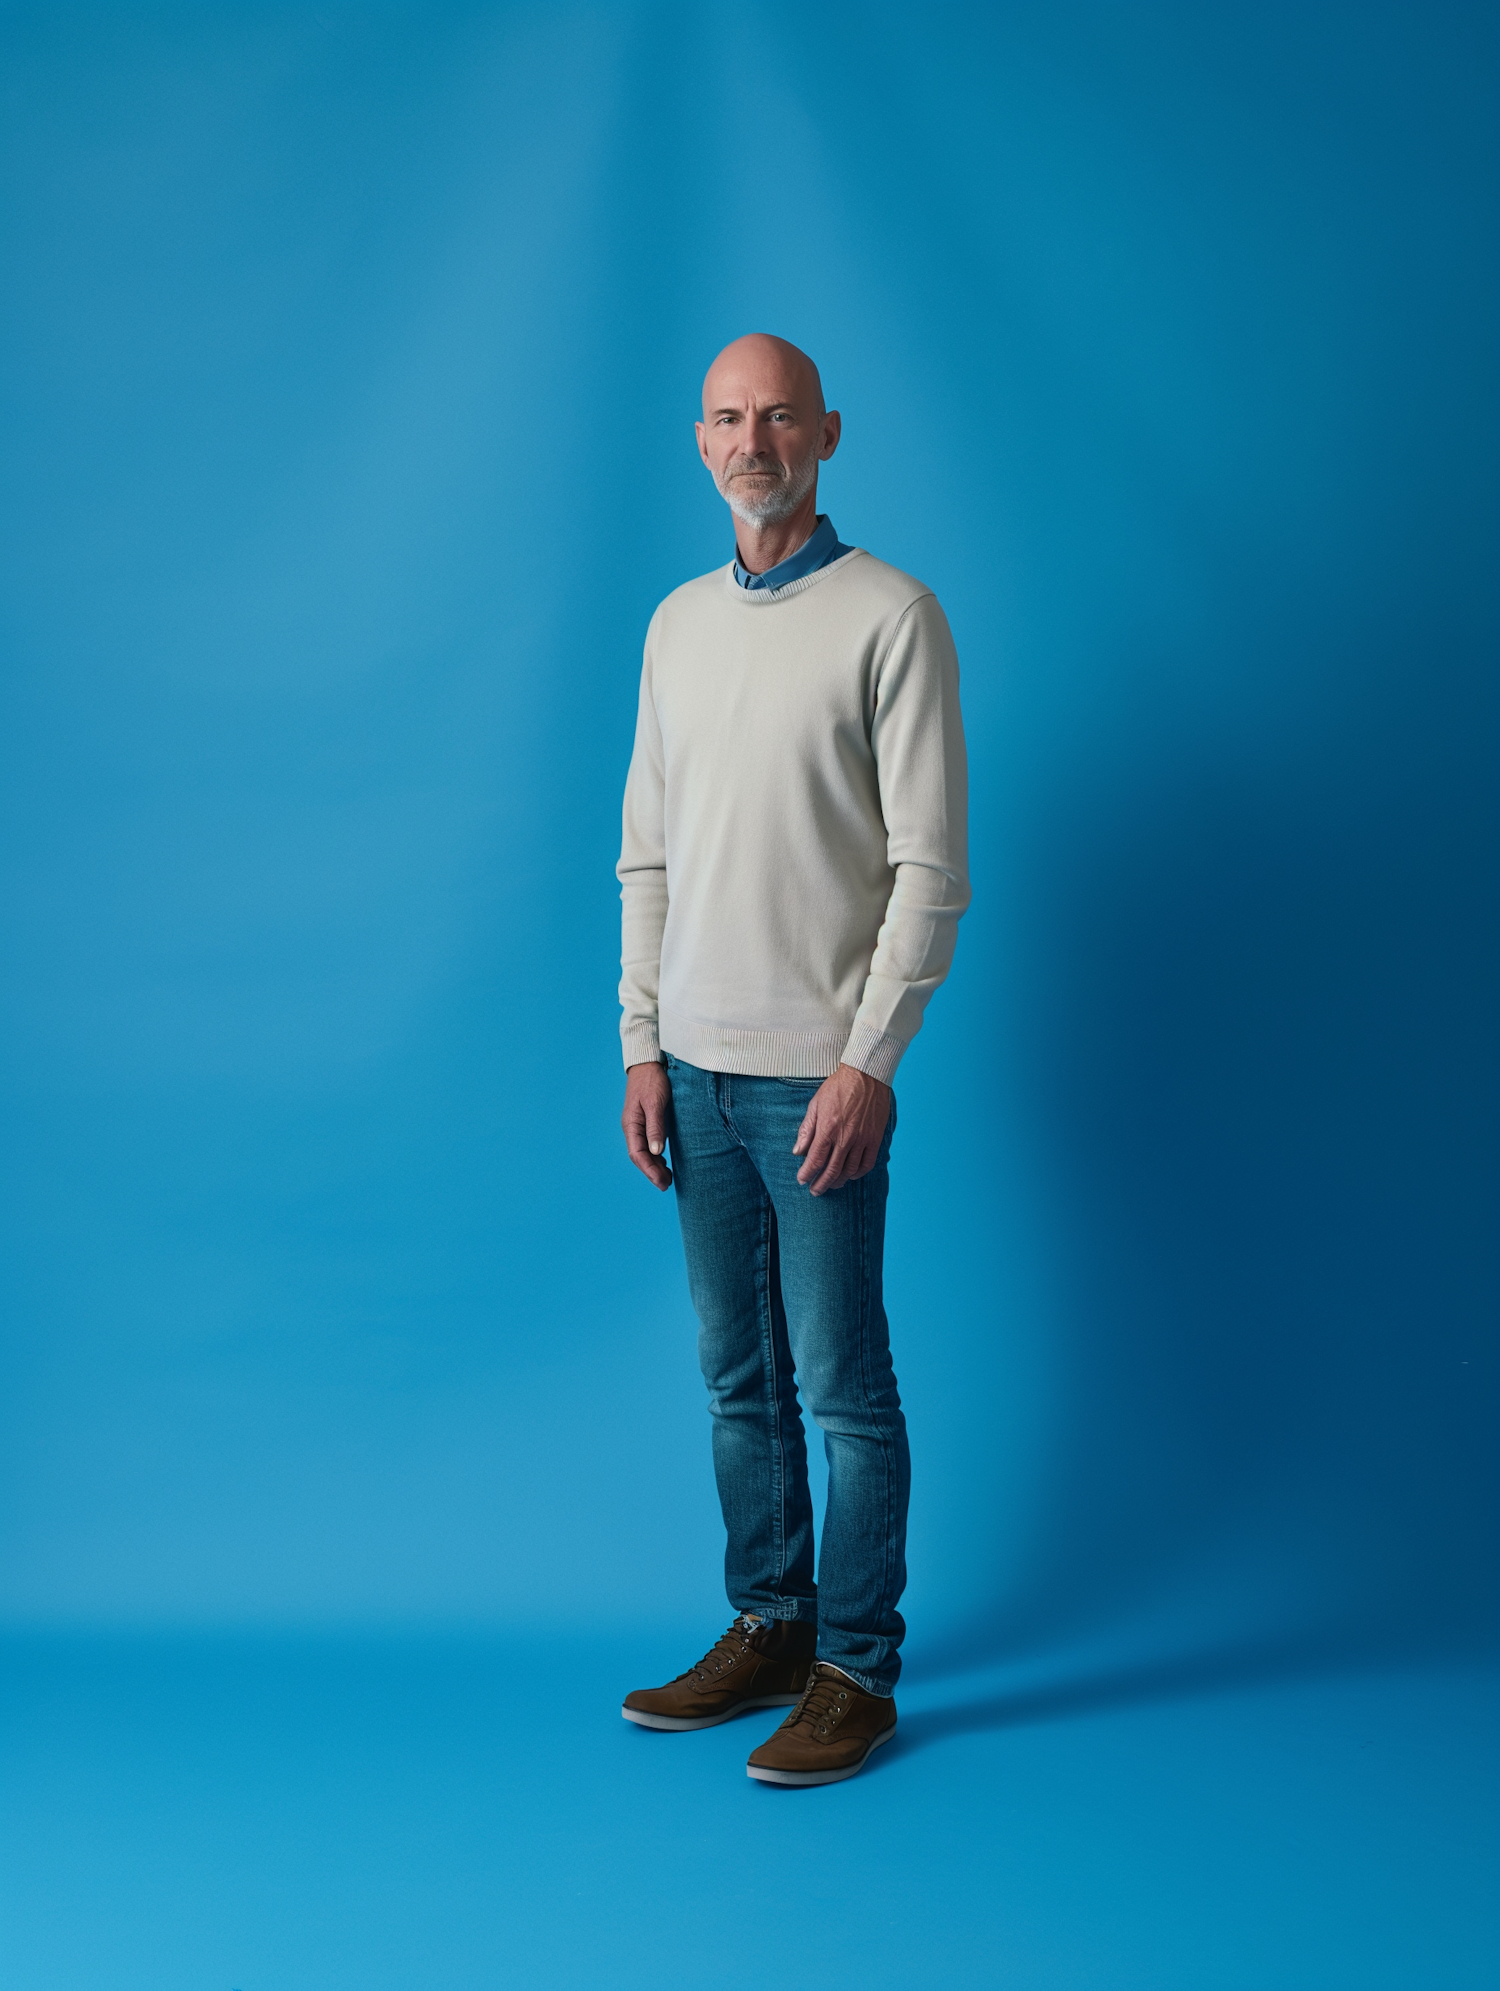 Tranquil Blue Backdrop with Gentleman in Cream Sweater and Jeans